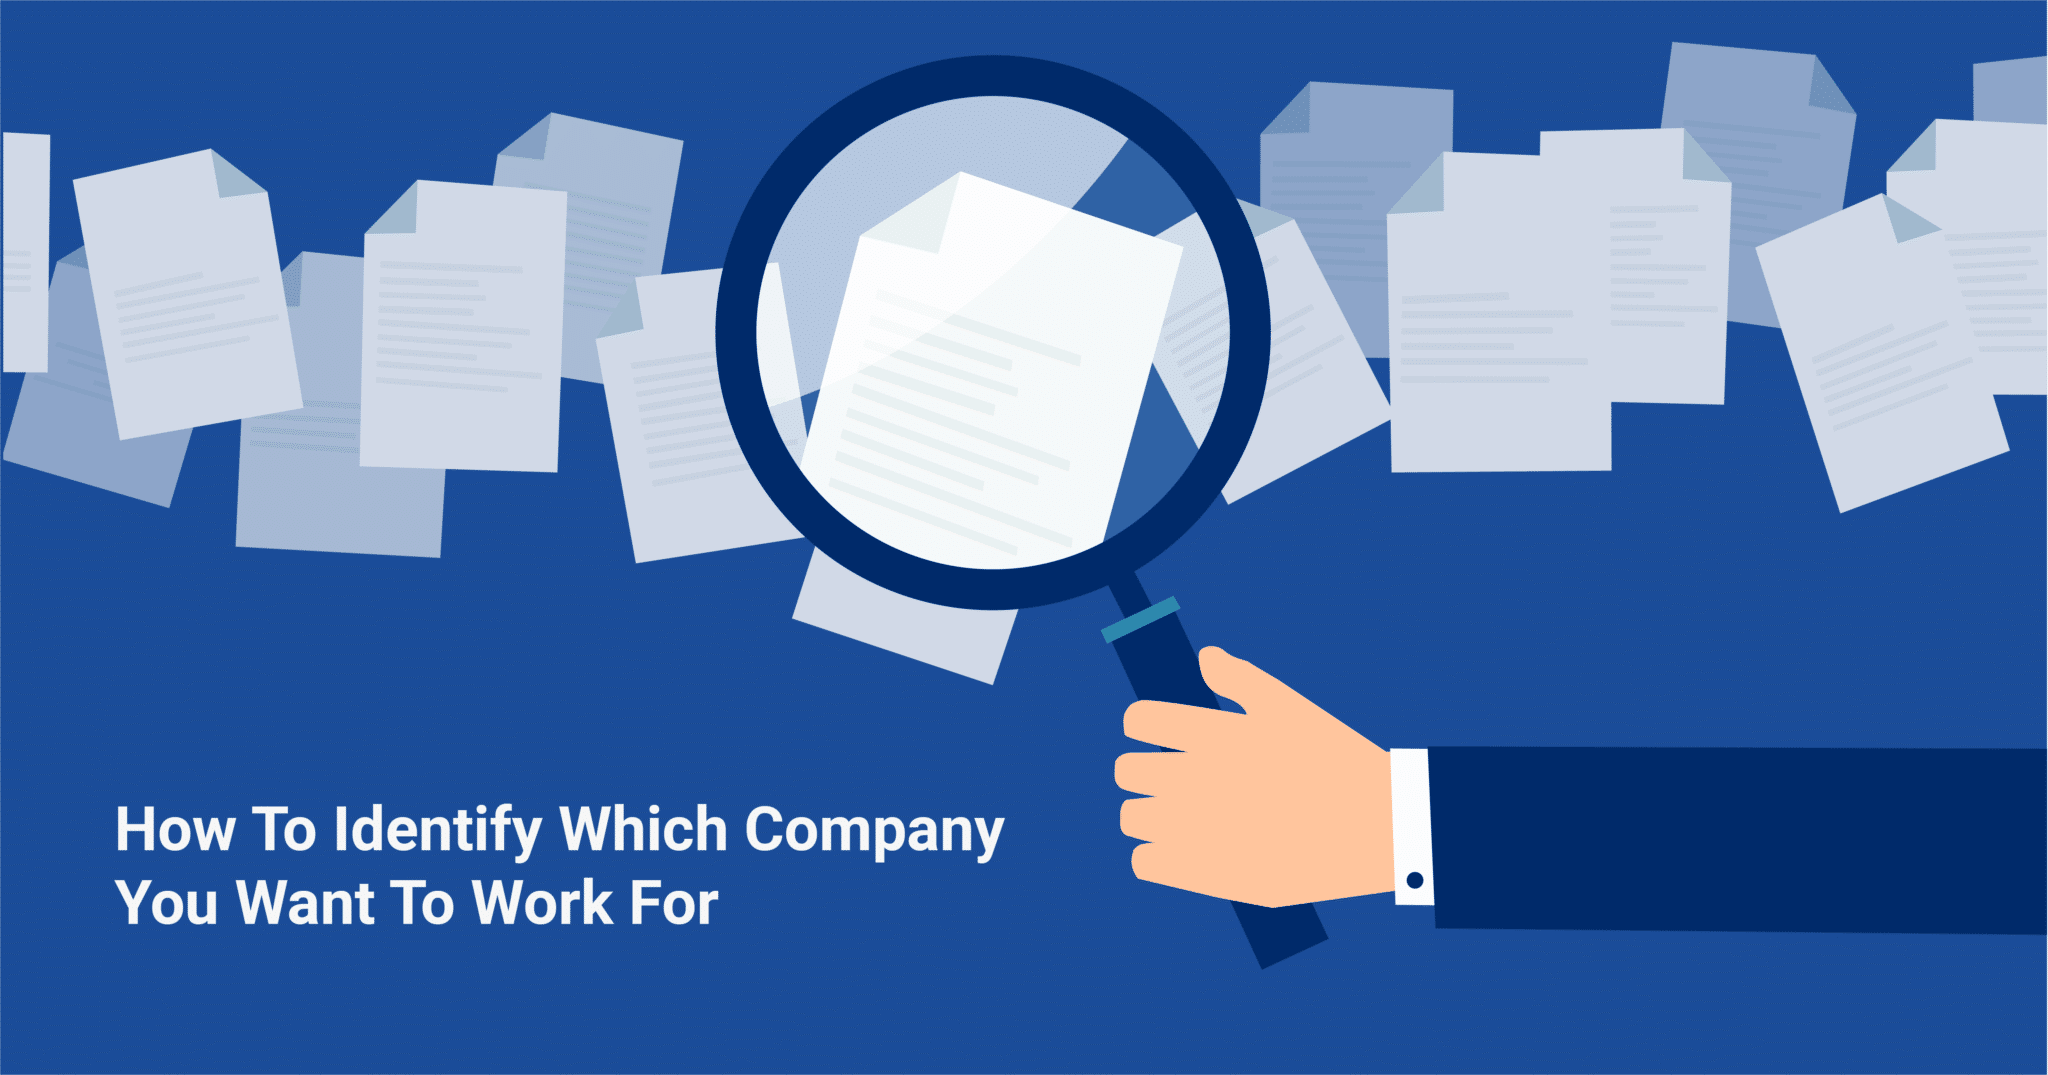 How to identify which company you want to work for